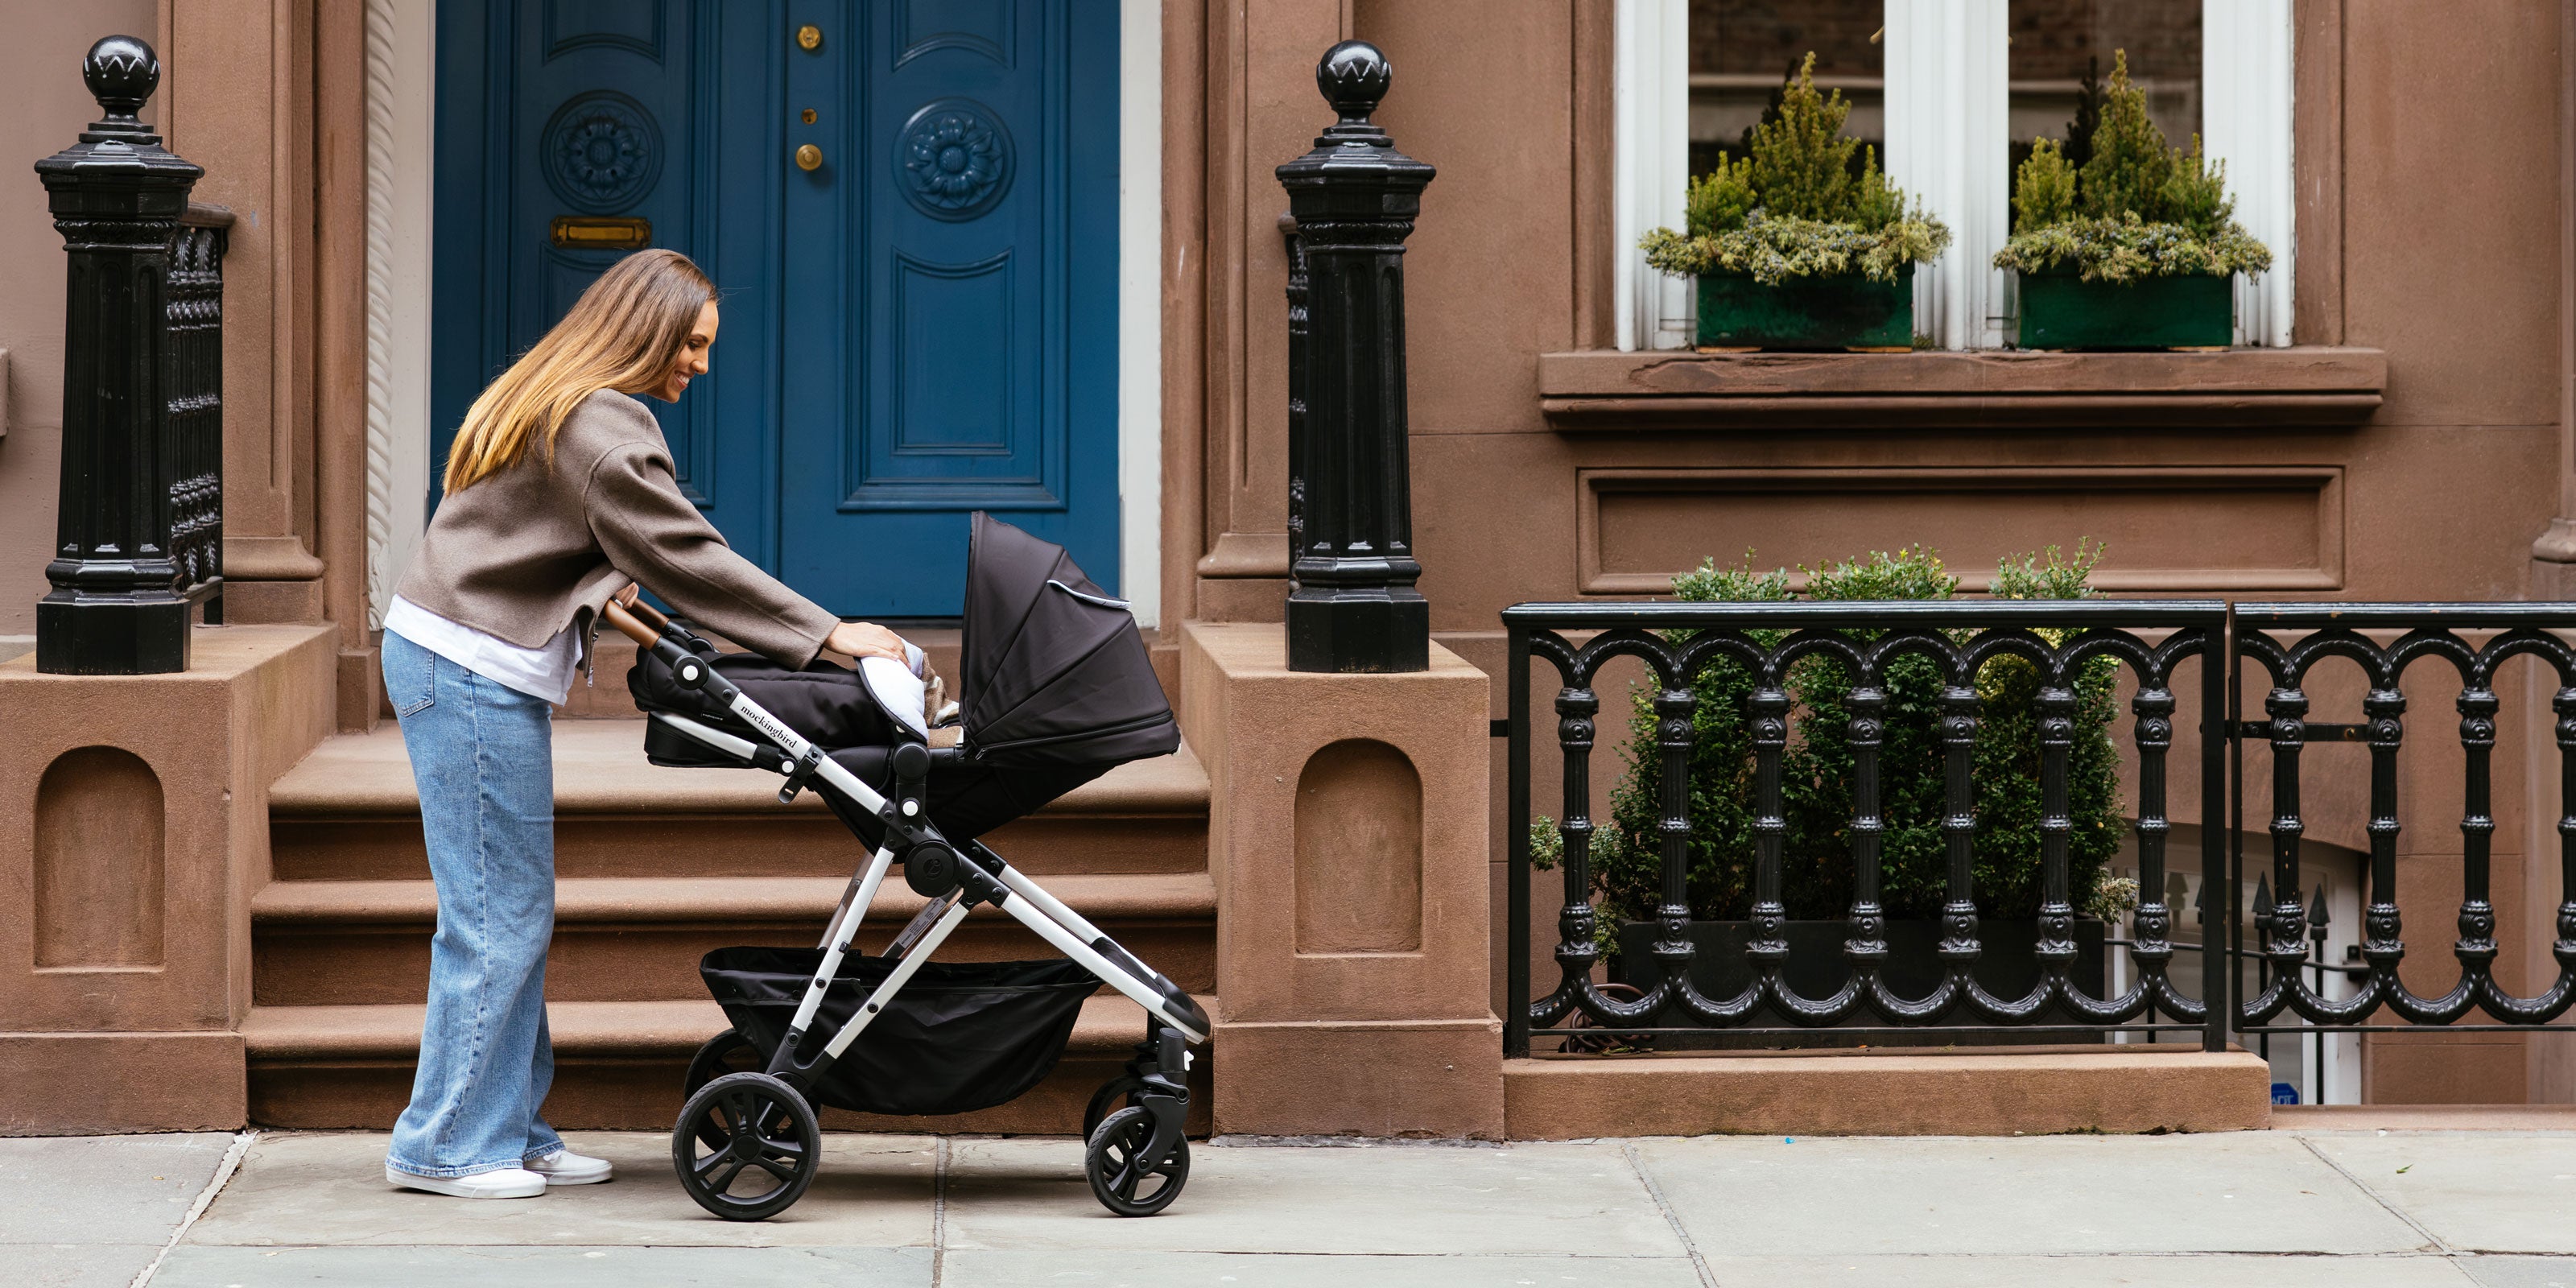 Woman pushing a stroller past brownstone houses with colorful doors on a city street.